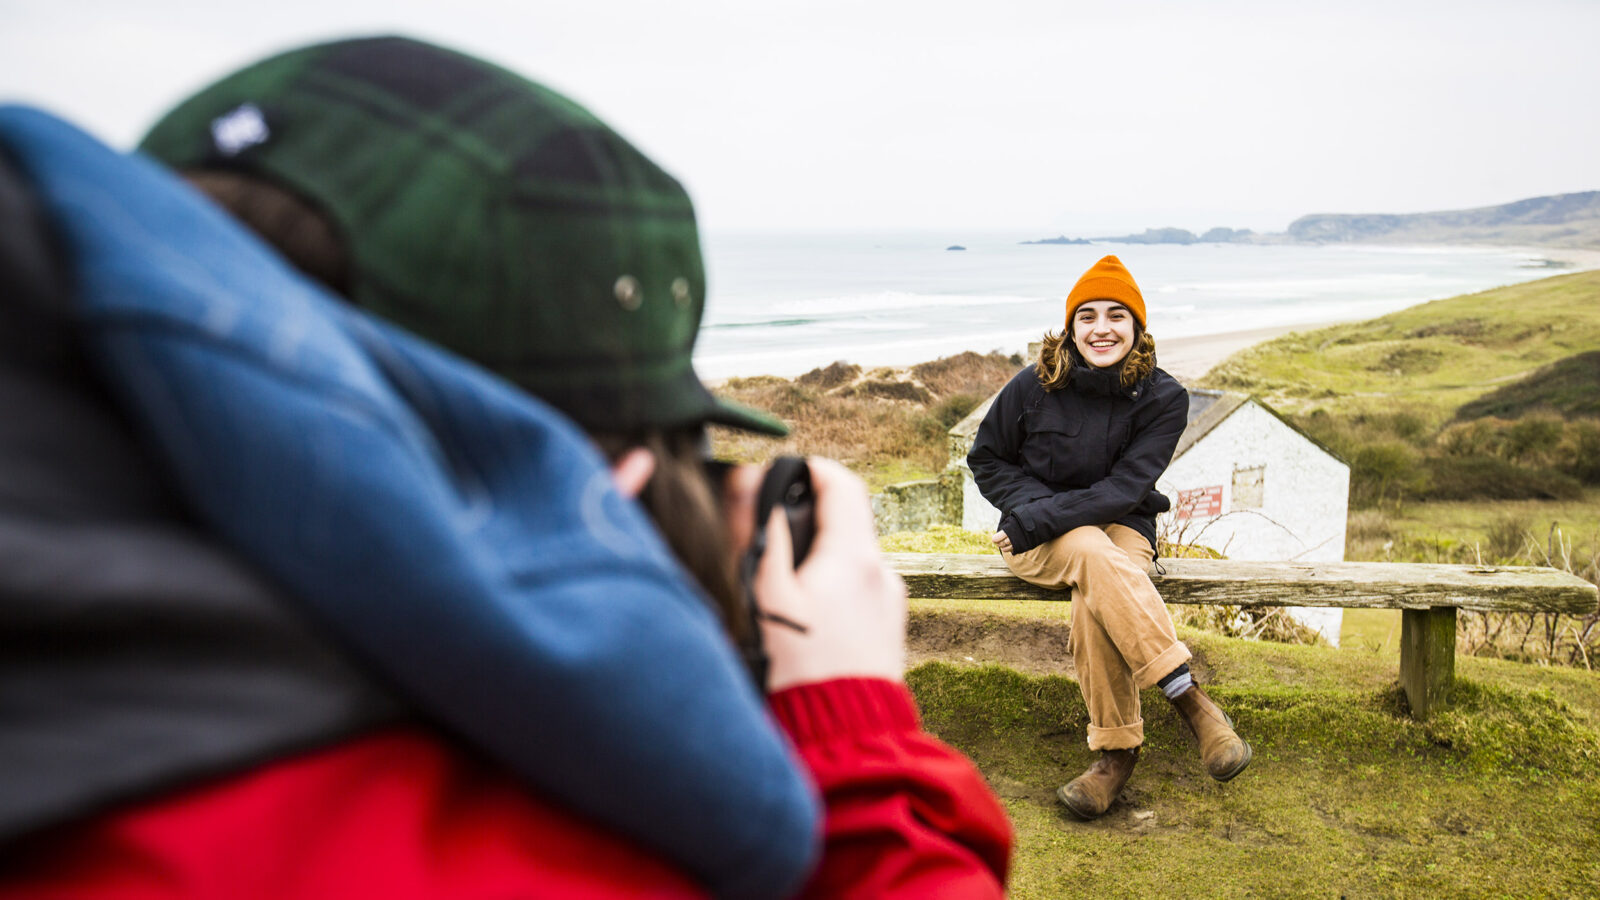 one students takes a photo of another student as she is seated on a bench, ocean in the background